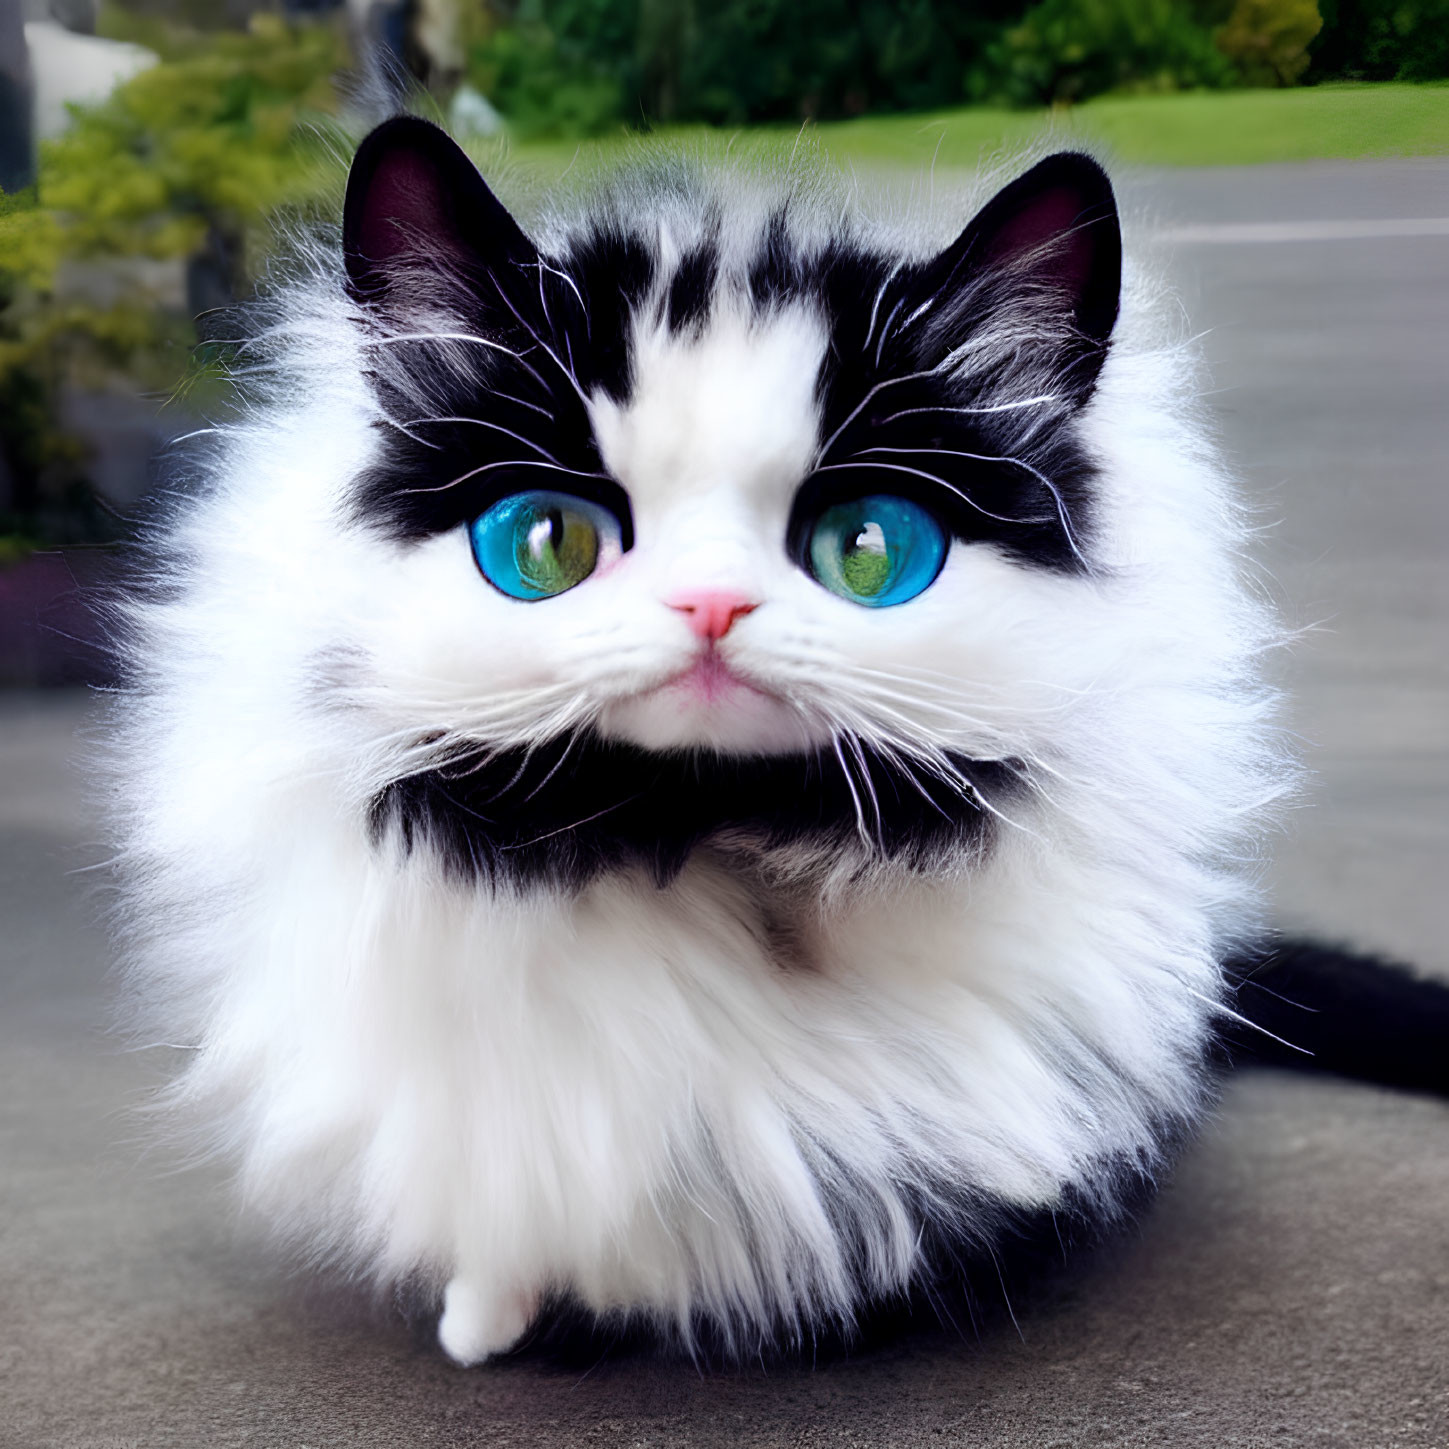 Black and White Cat with Blue Eyes and Pink Nose Outdoors